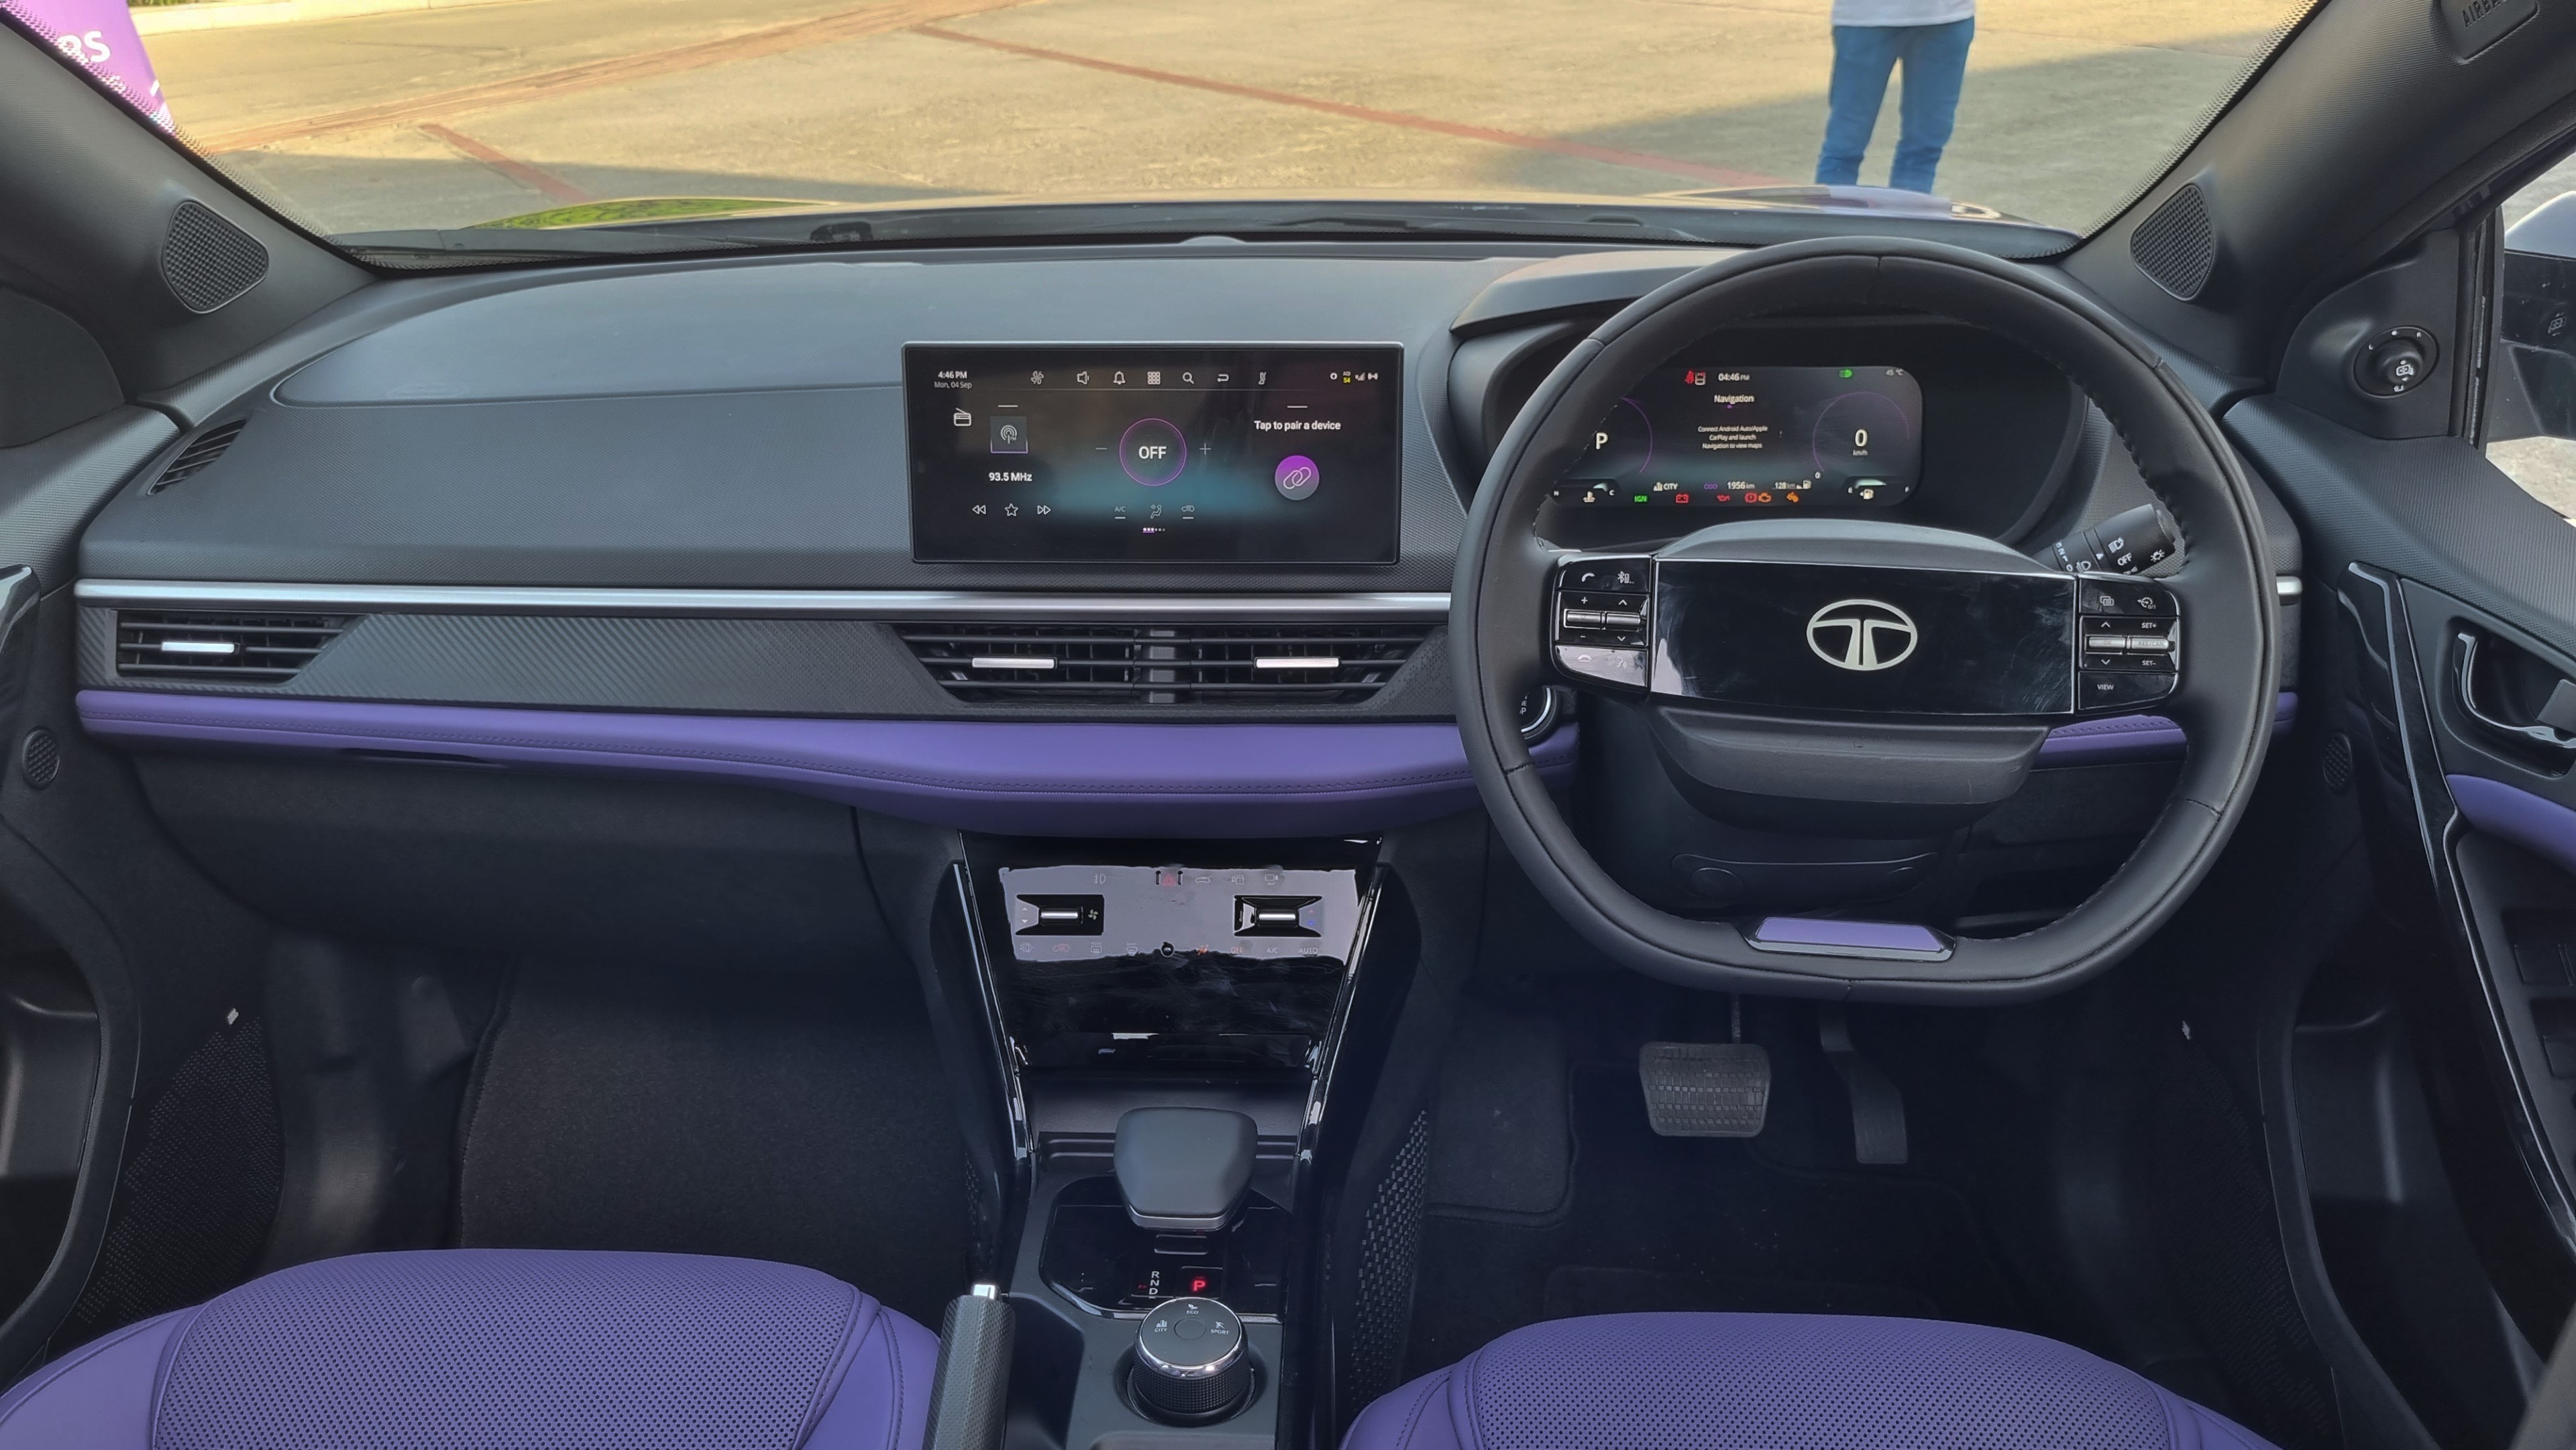 The Tata Nexon gets a revised dashboard with a minimalist design theme. Fewer buttons, redesigned air vents and new floating infotainment screens are mainstays